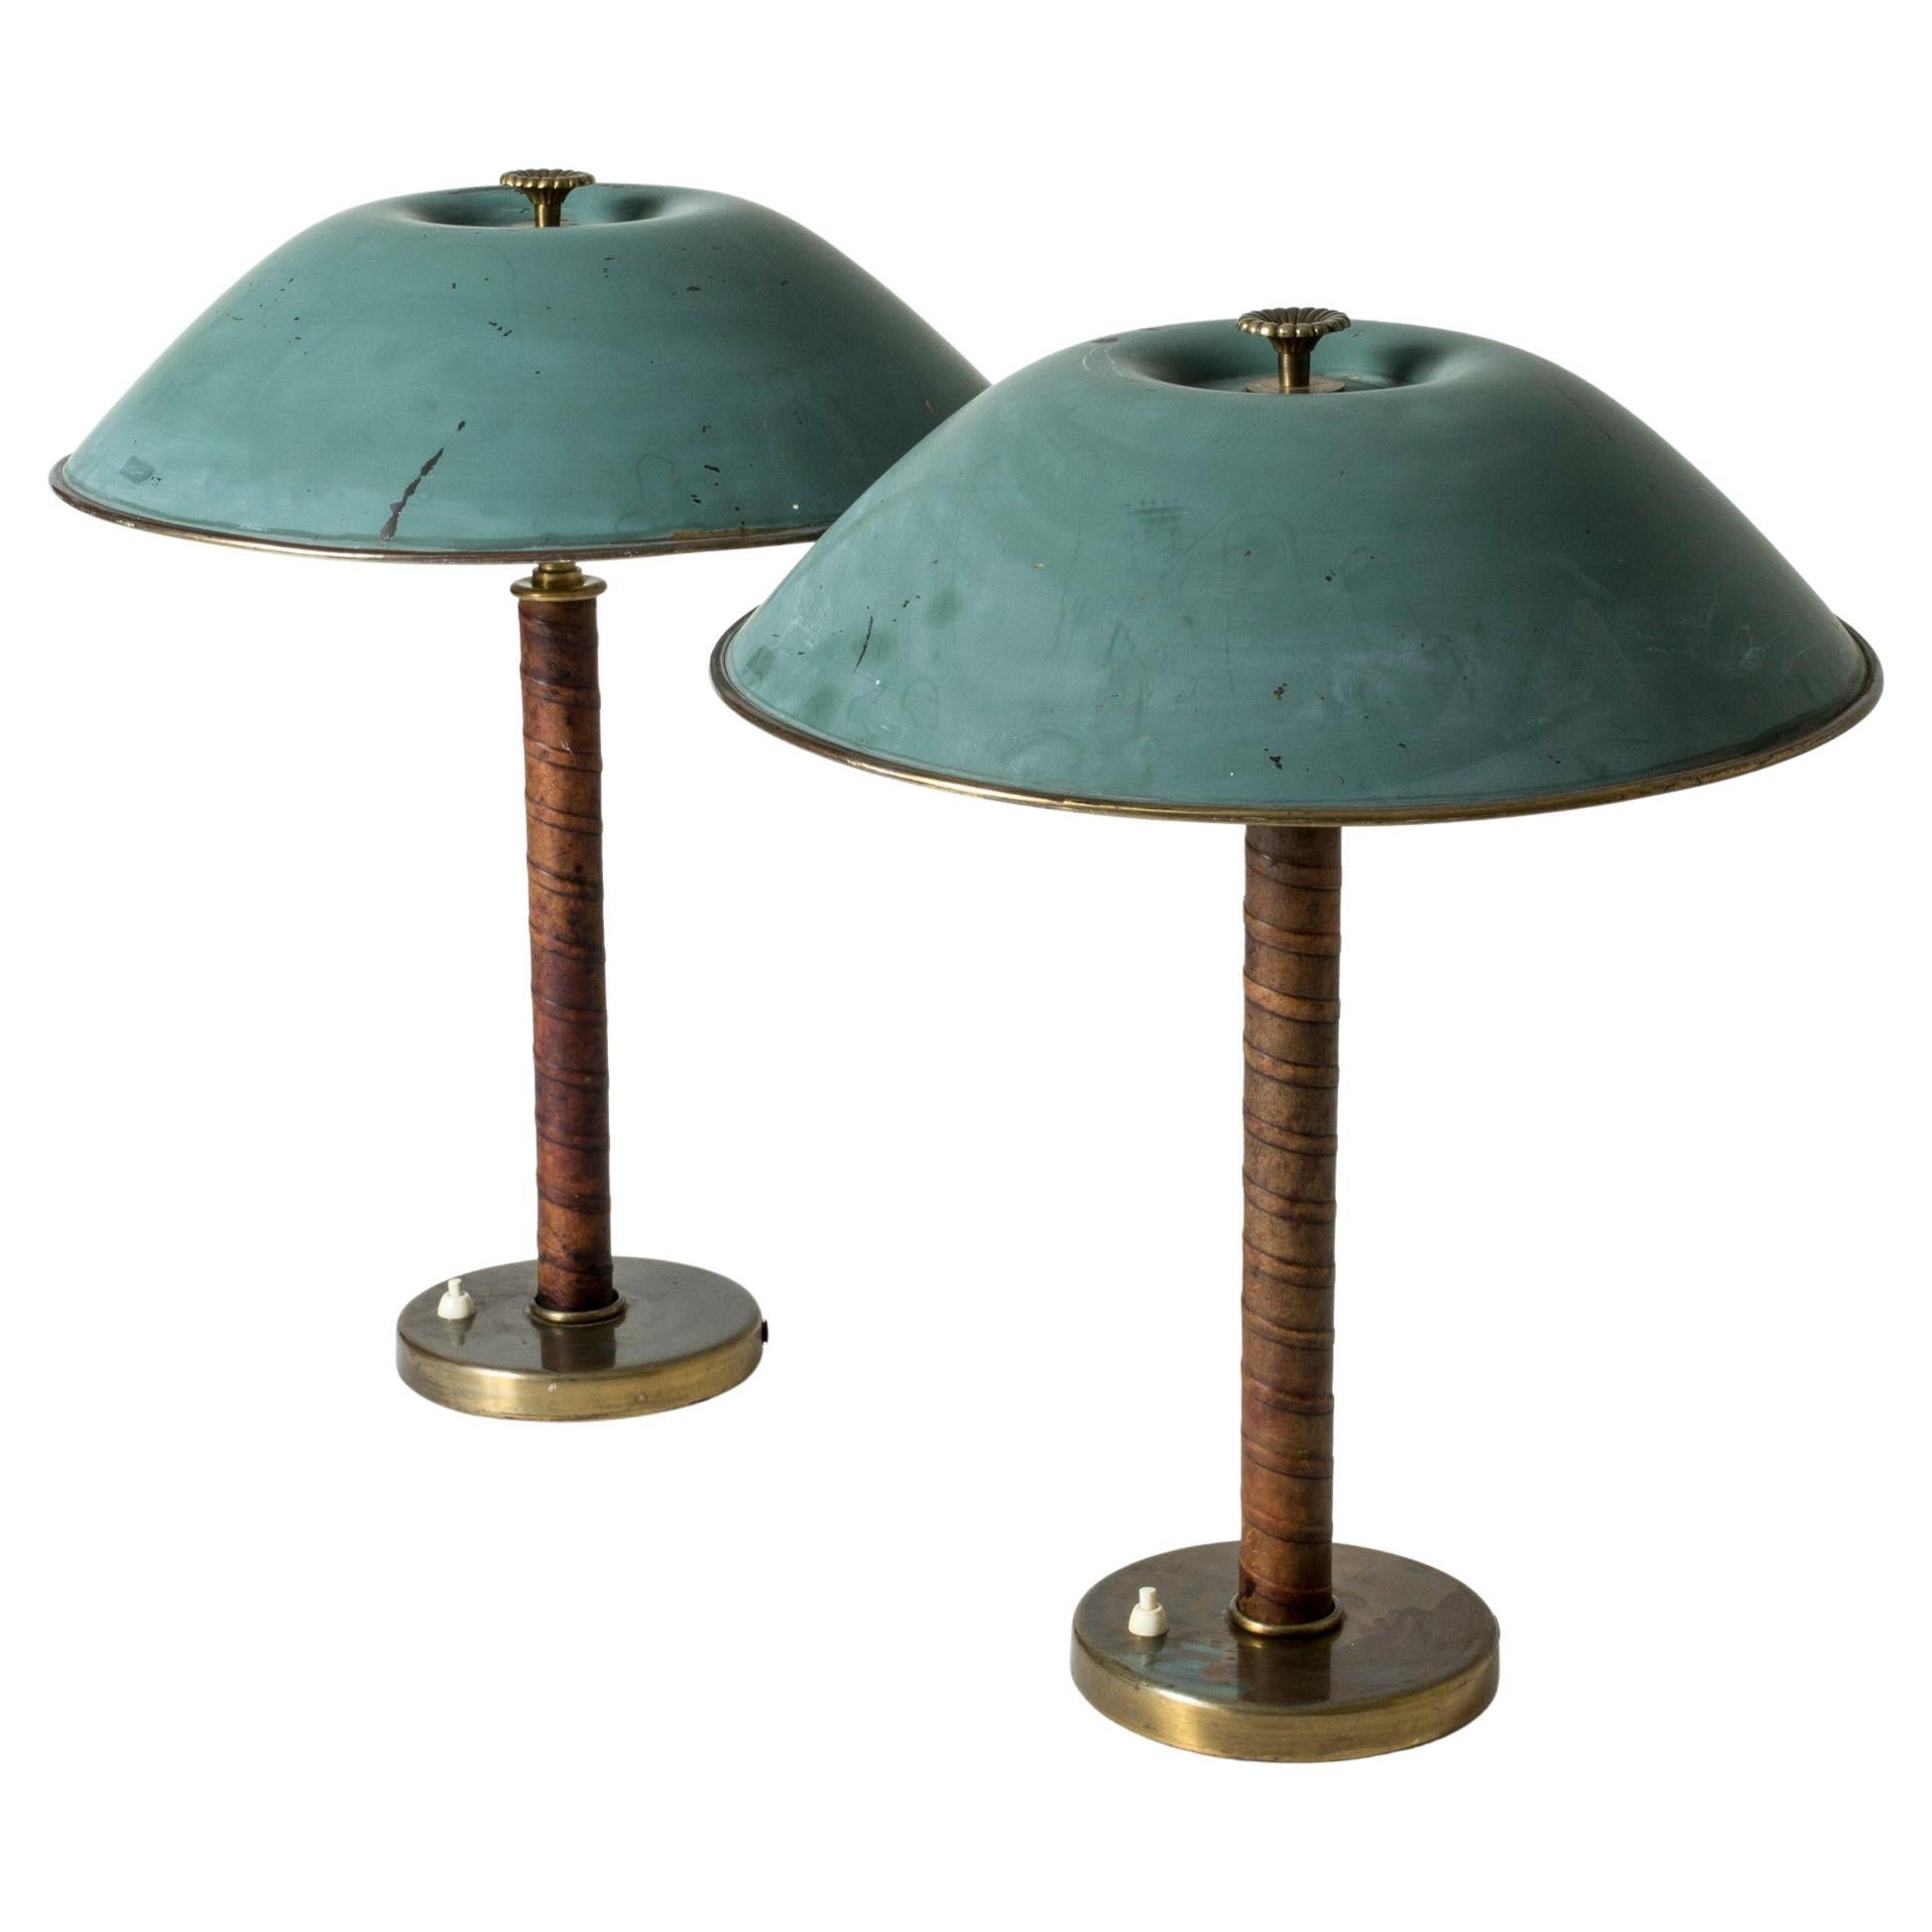 1940s Table Lamps